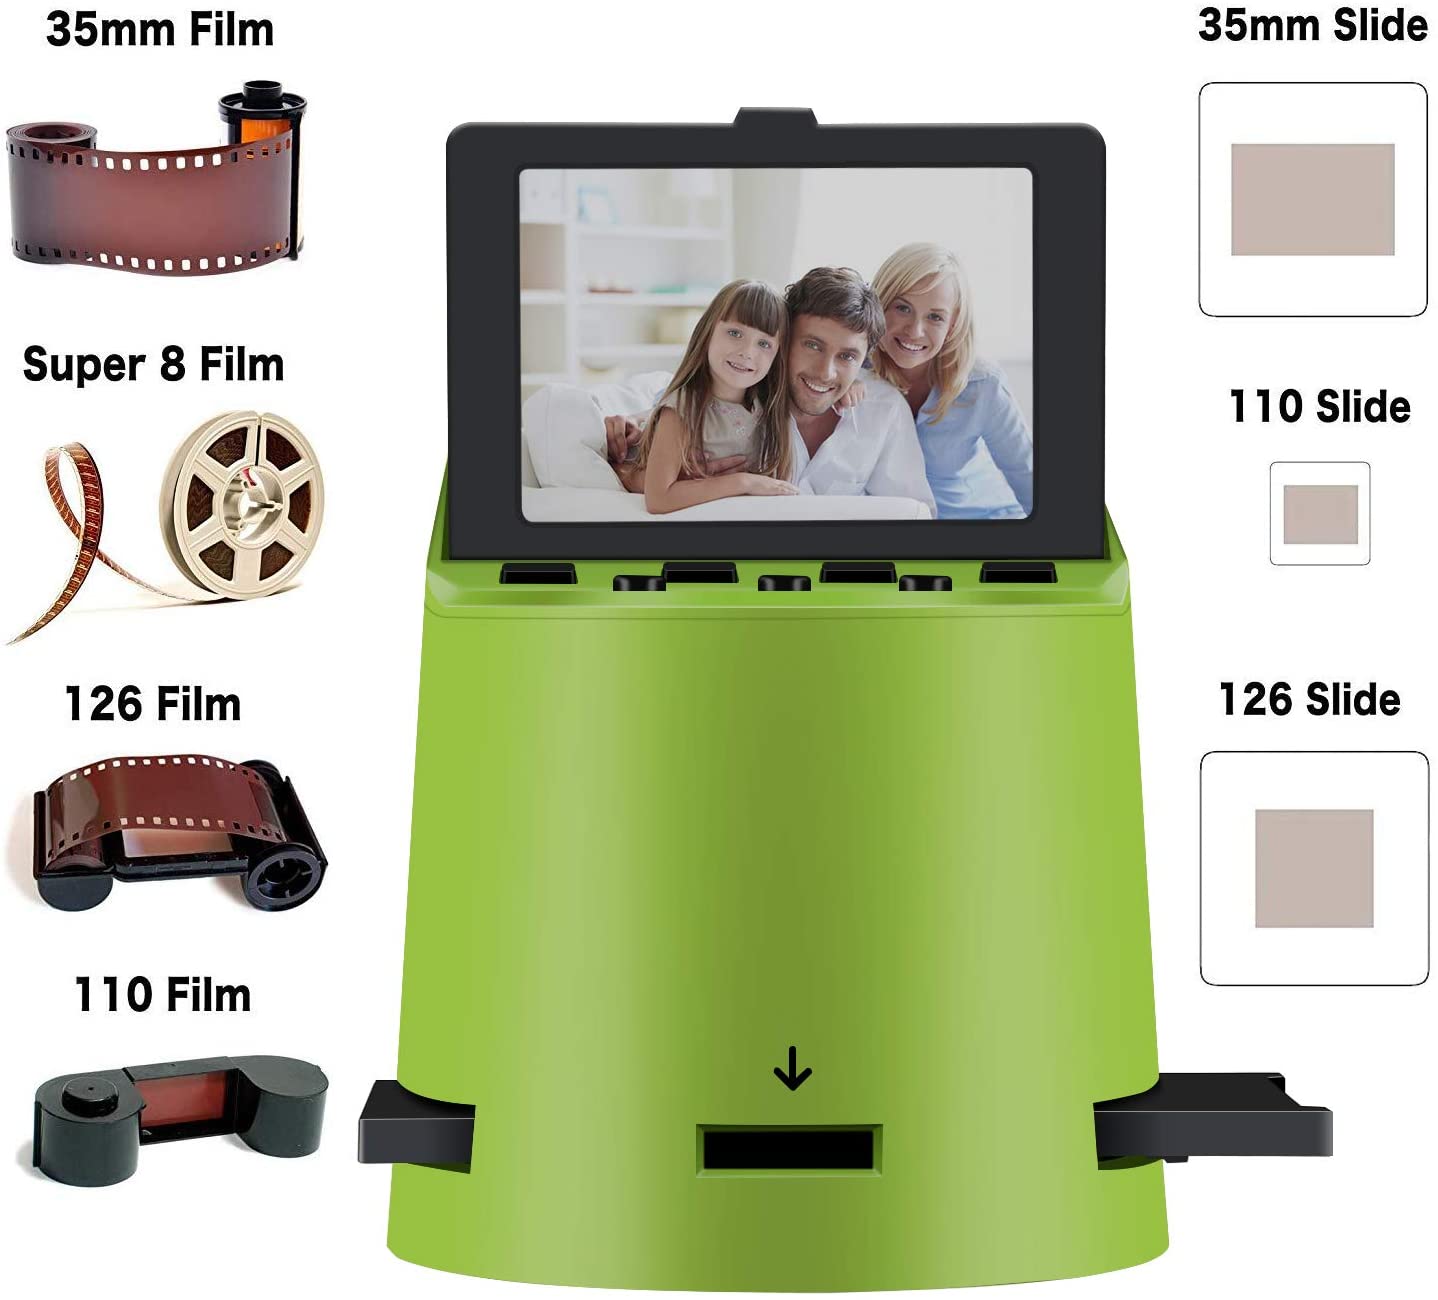 Digital Film Scanner with 22MP Converts 35mm, 126, 110, Super 8 Films, Slides, Negatives to JPEG 3.5" LCD WiFi Connection